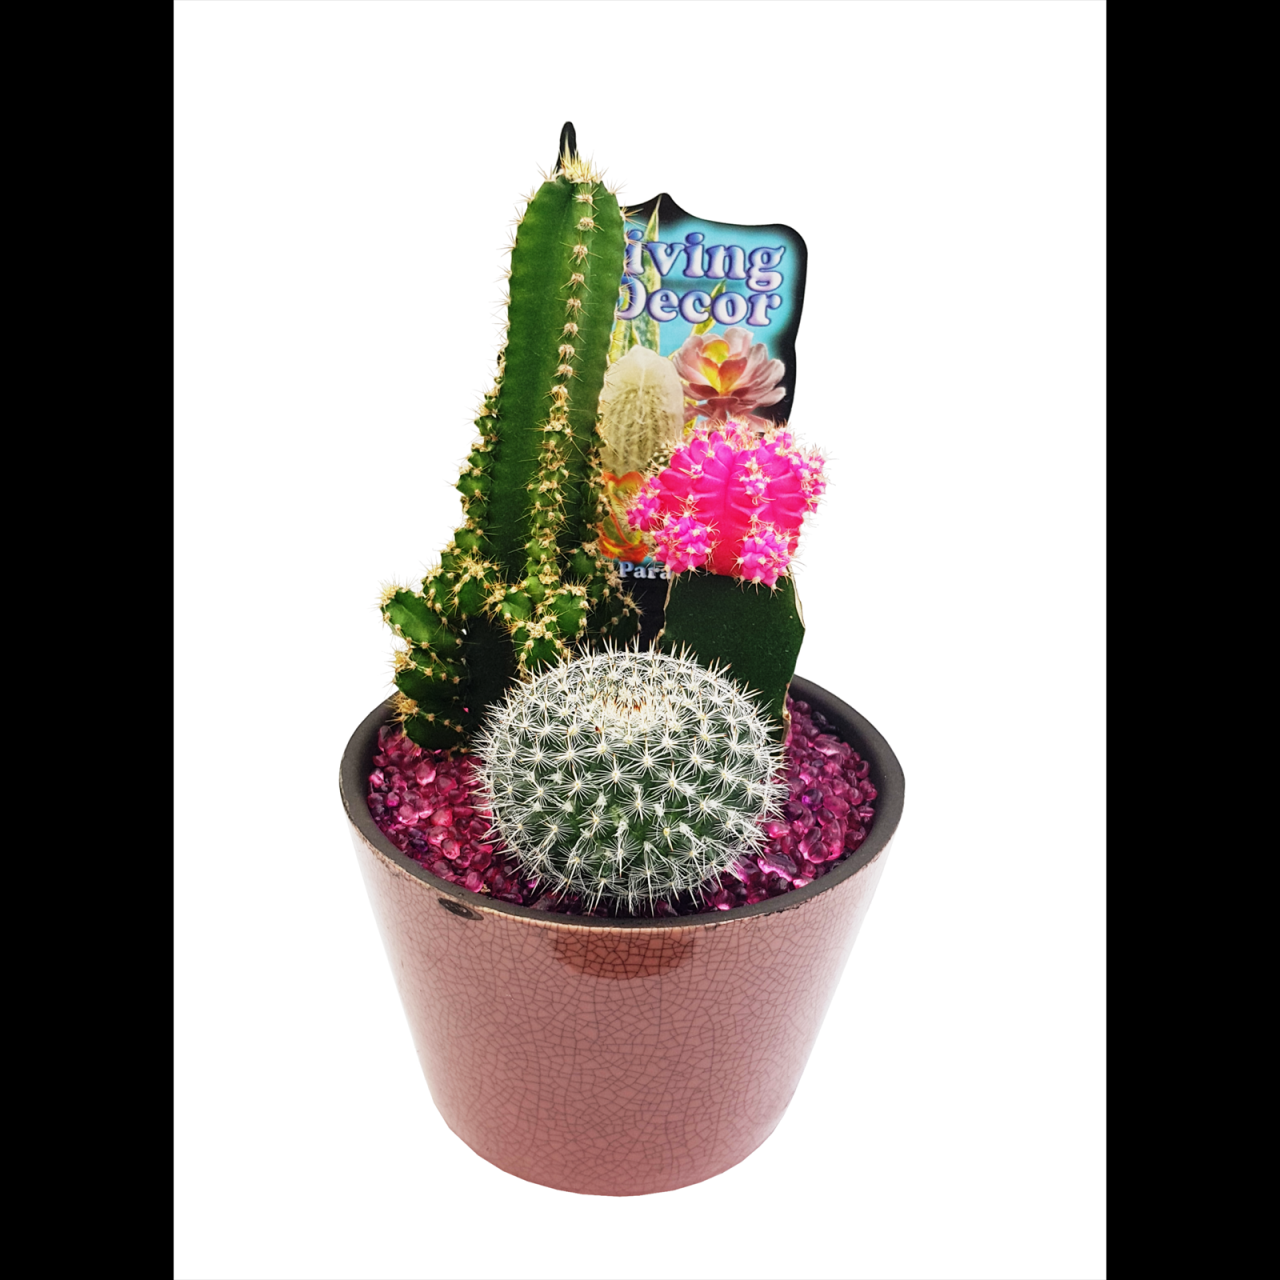 Hanging Plants Indoor | Bunnings Cactus Pots: Essential Guide to Materials, Design, and Care